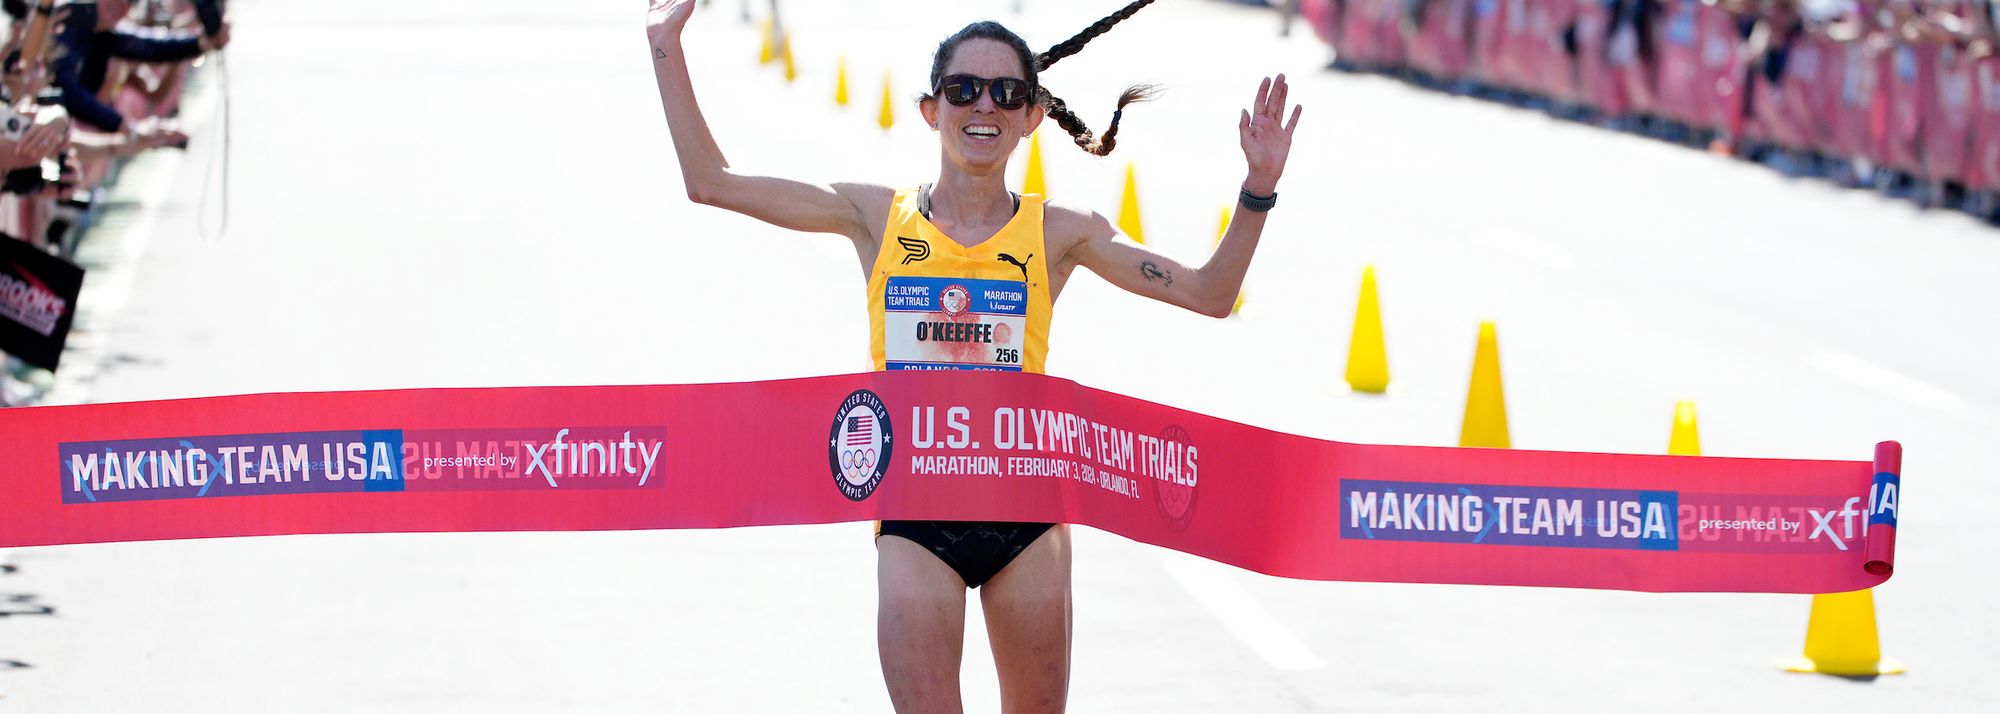 Conner Mantz and marathon debutante Fiona O’Keeffe secured their selection for Paris by winning the US Olympic Marathon Trials in Orlando on Saturday